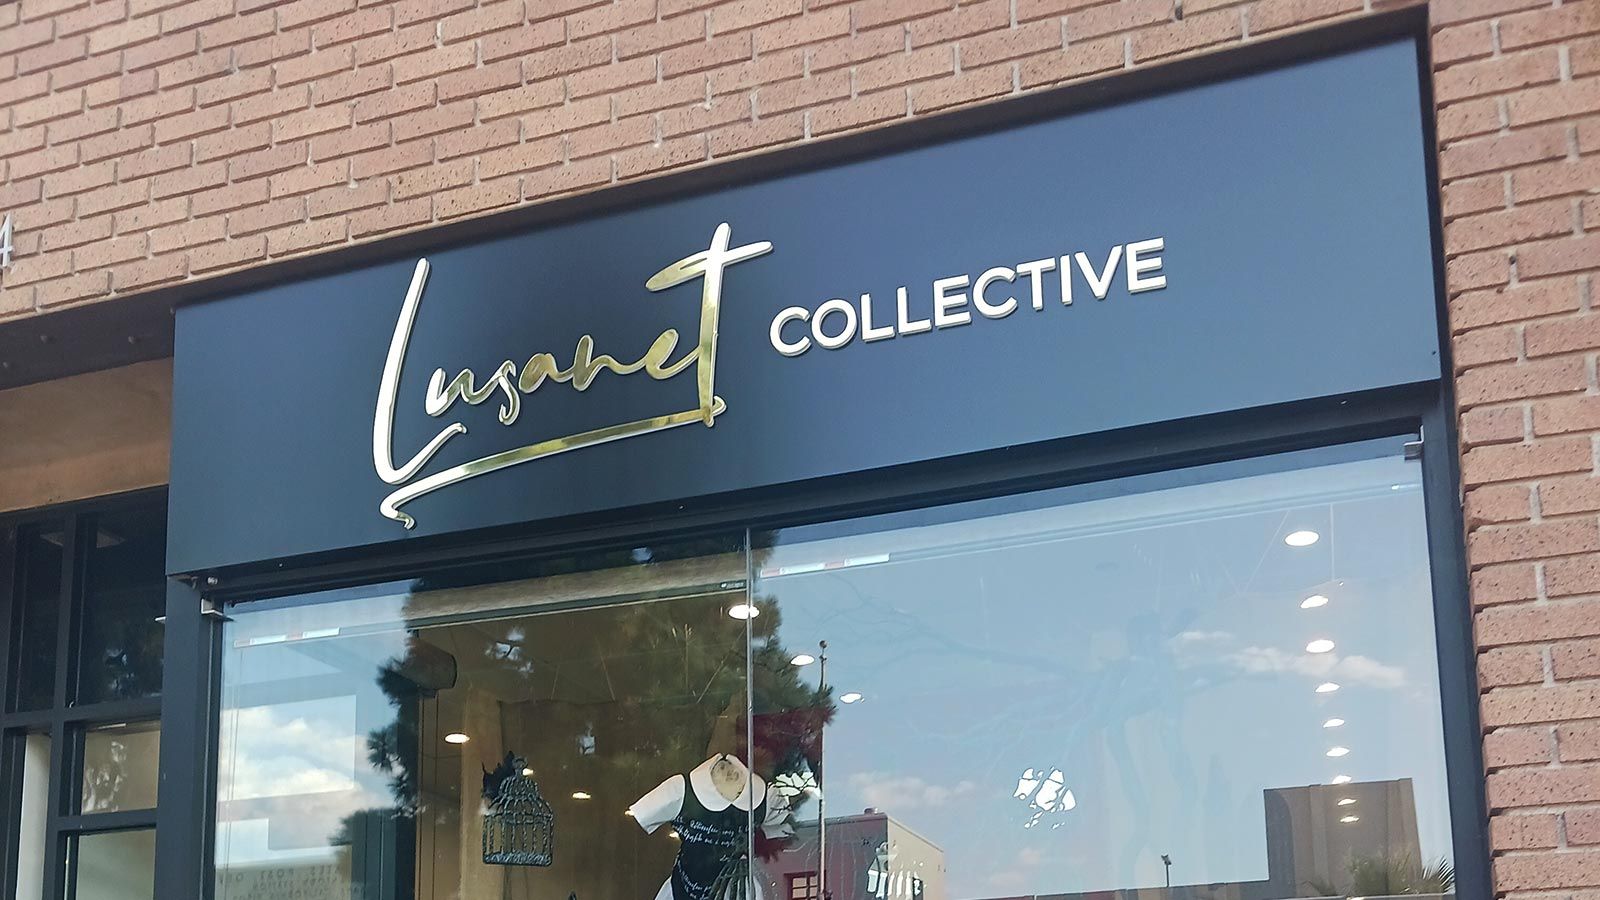 Lusanet Collective light up sign attached outdoors